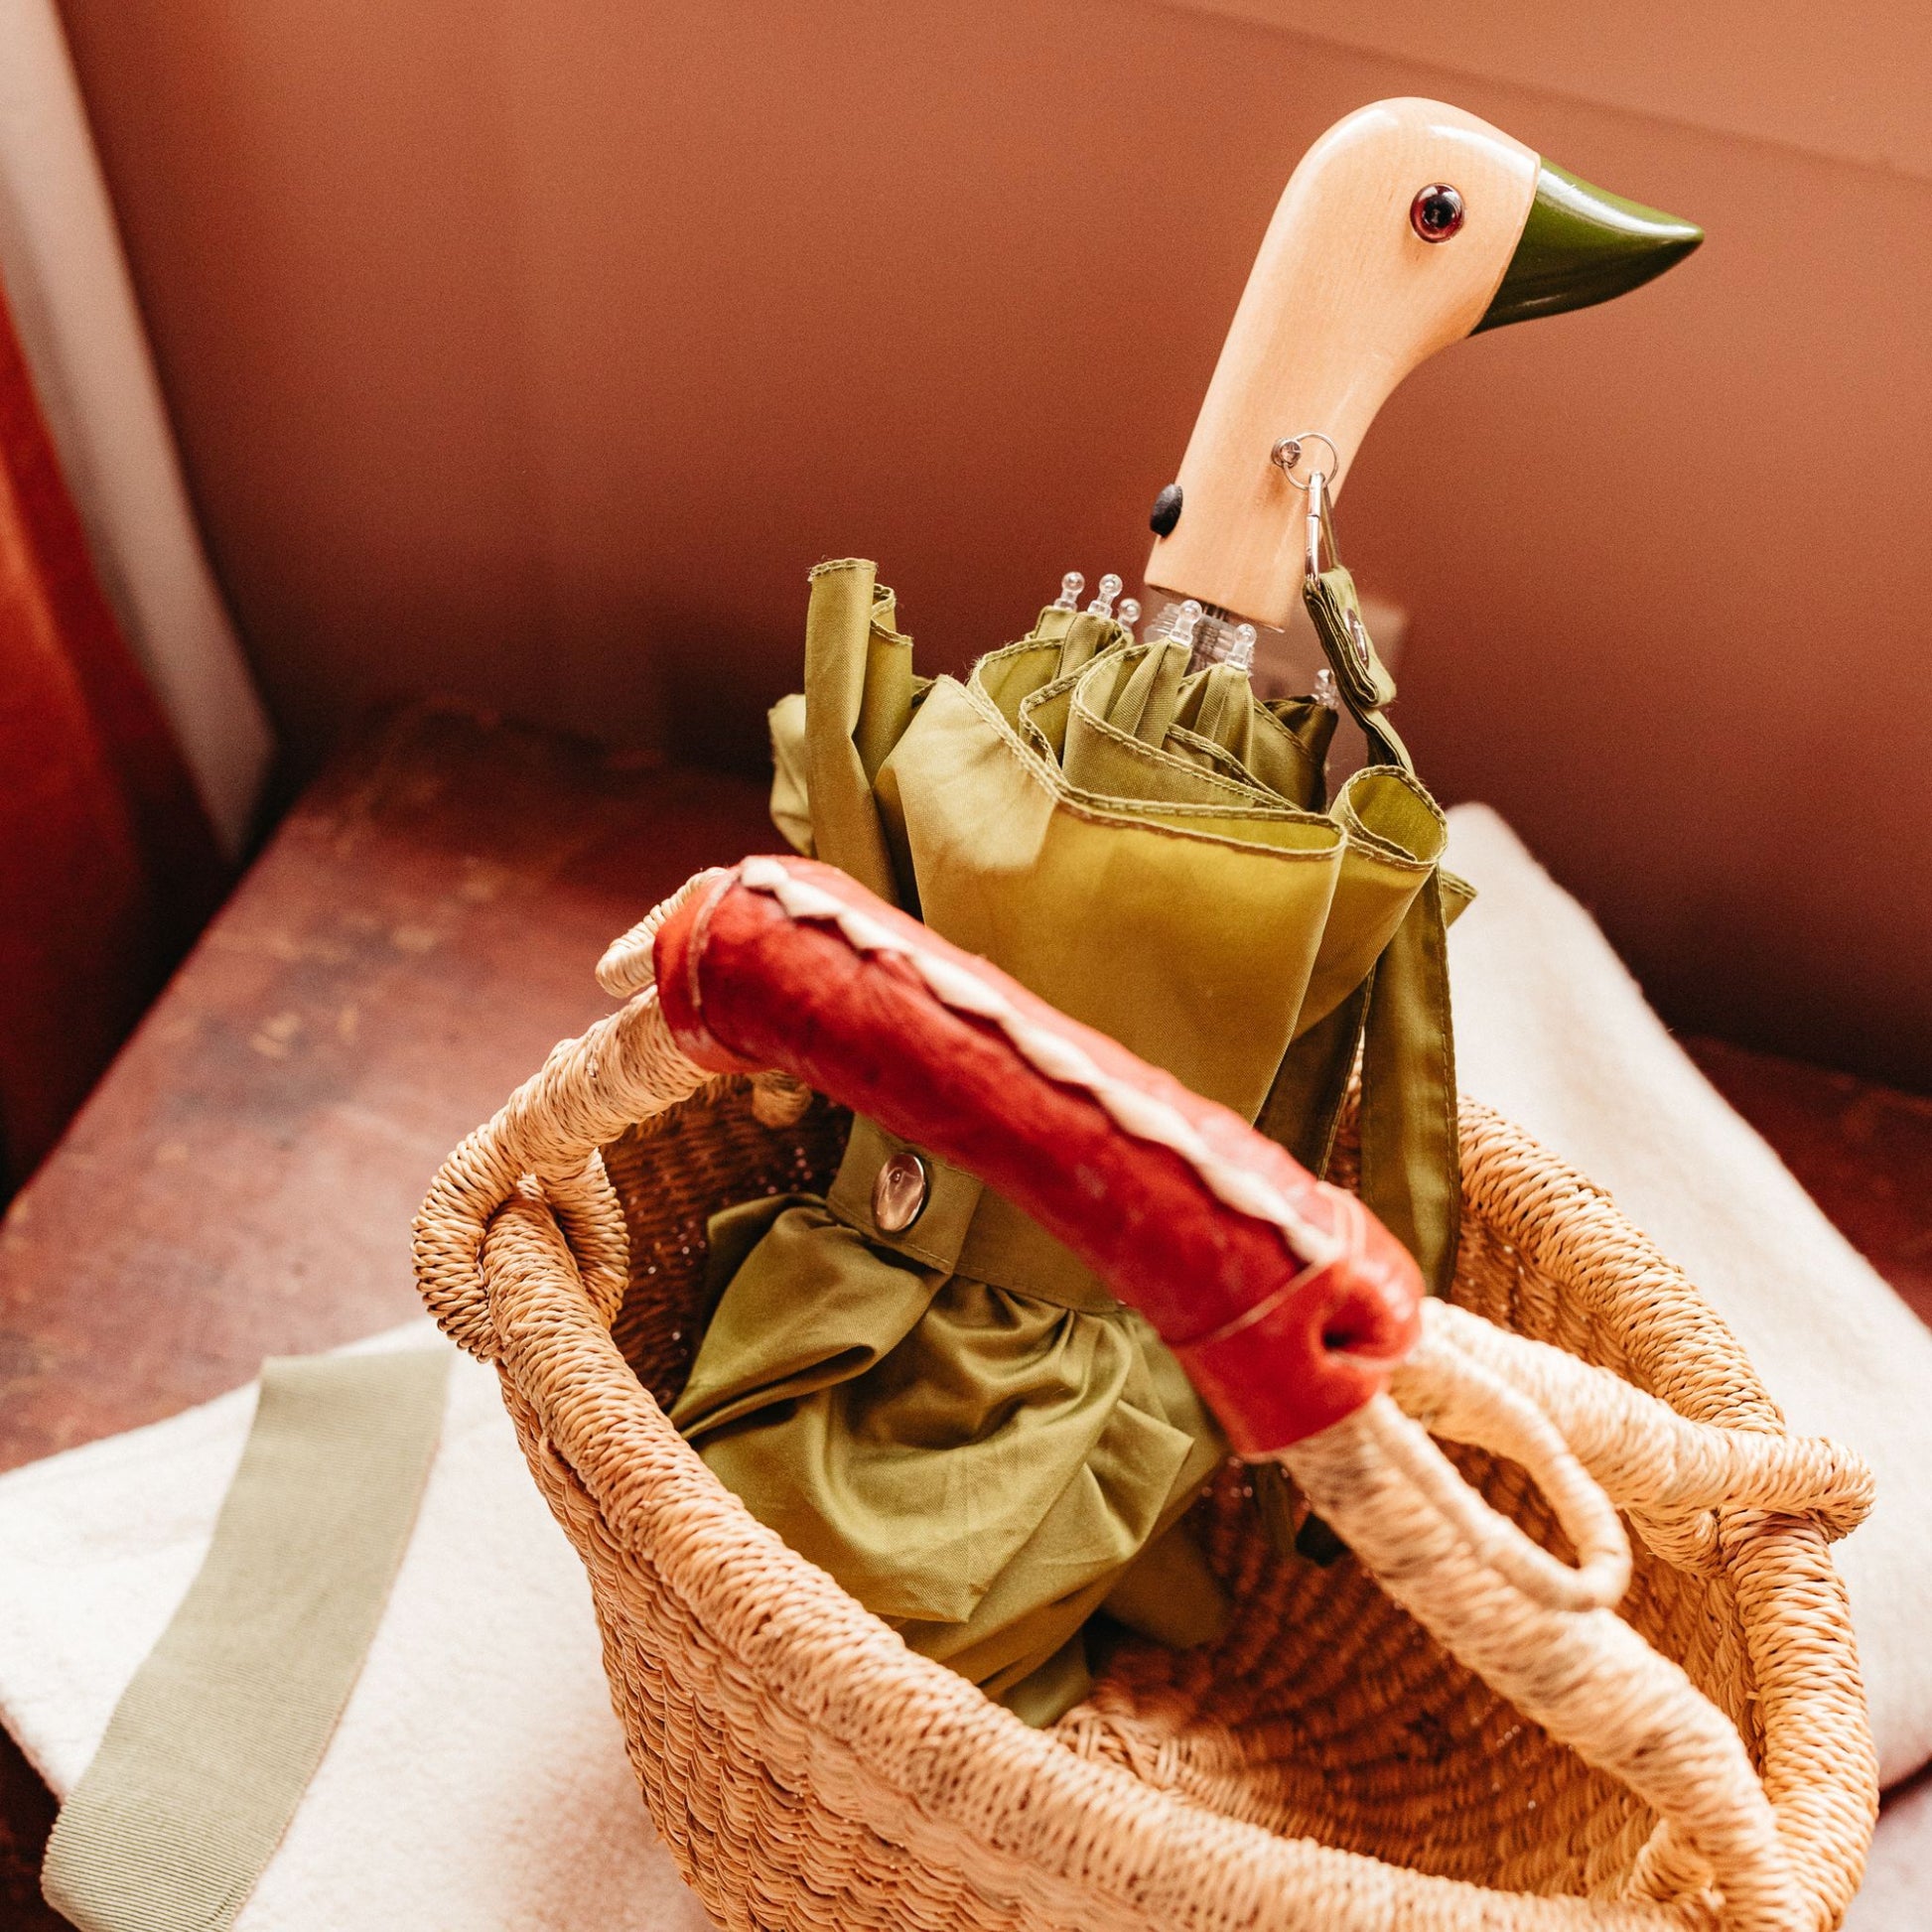 umbrella in olive with birchwood handle in the shape of duck head resting in a basket